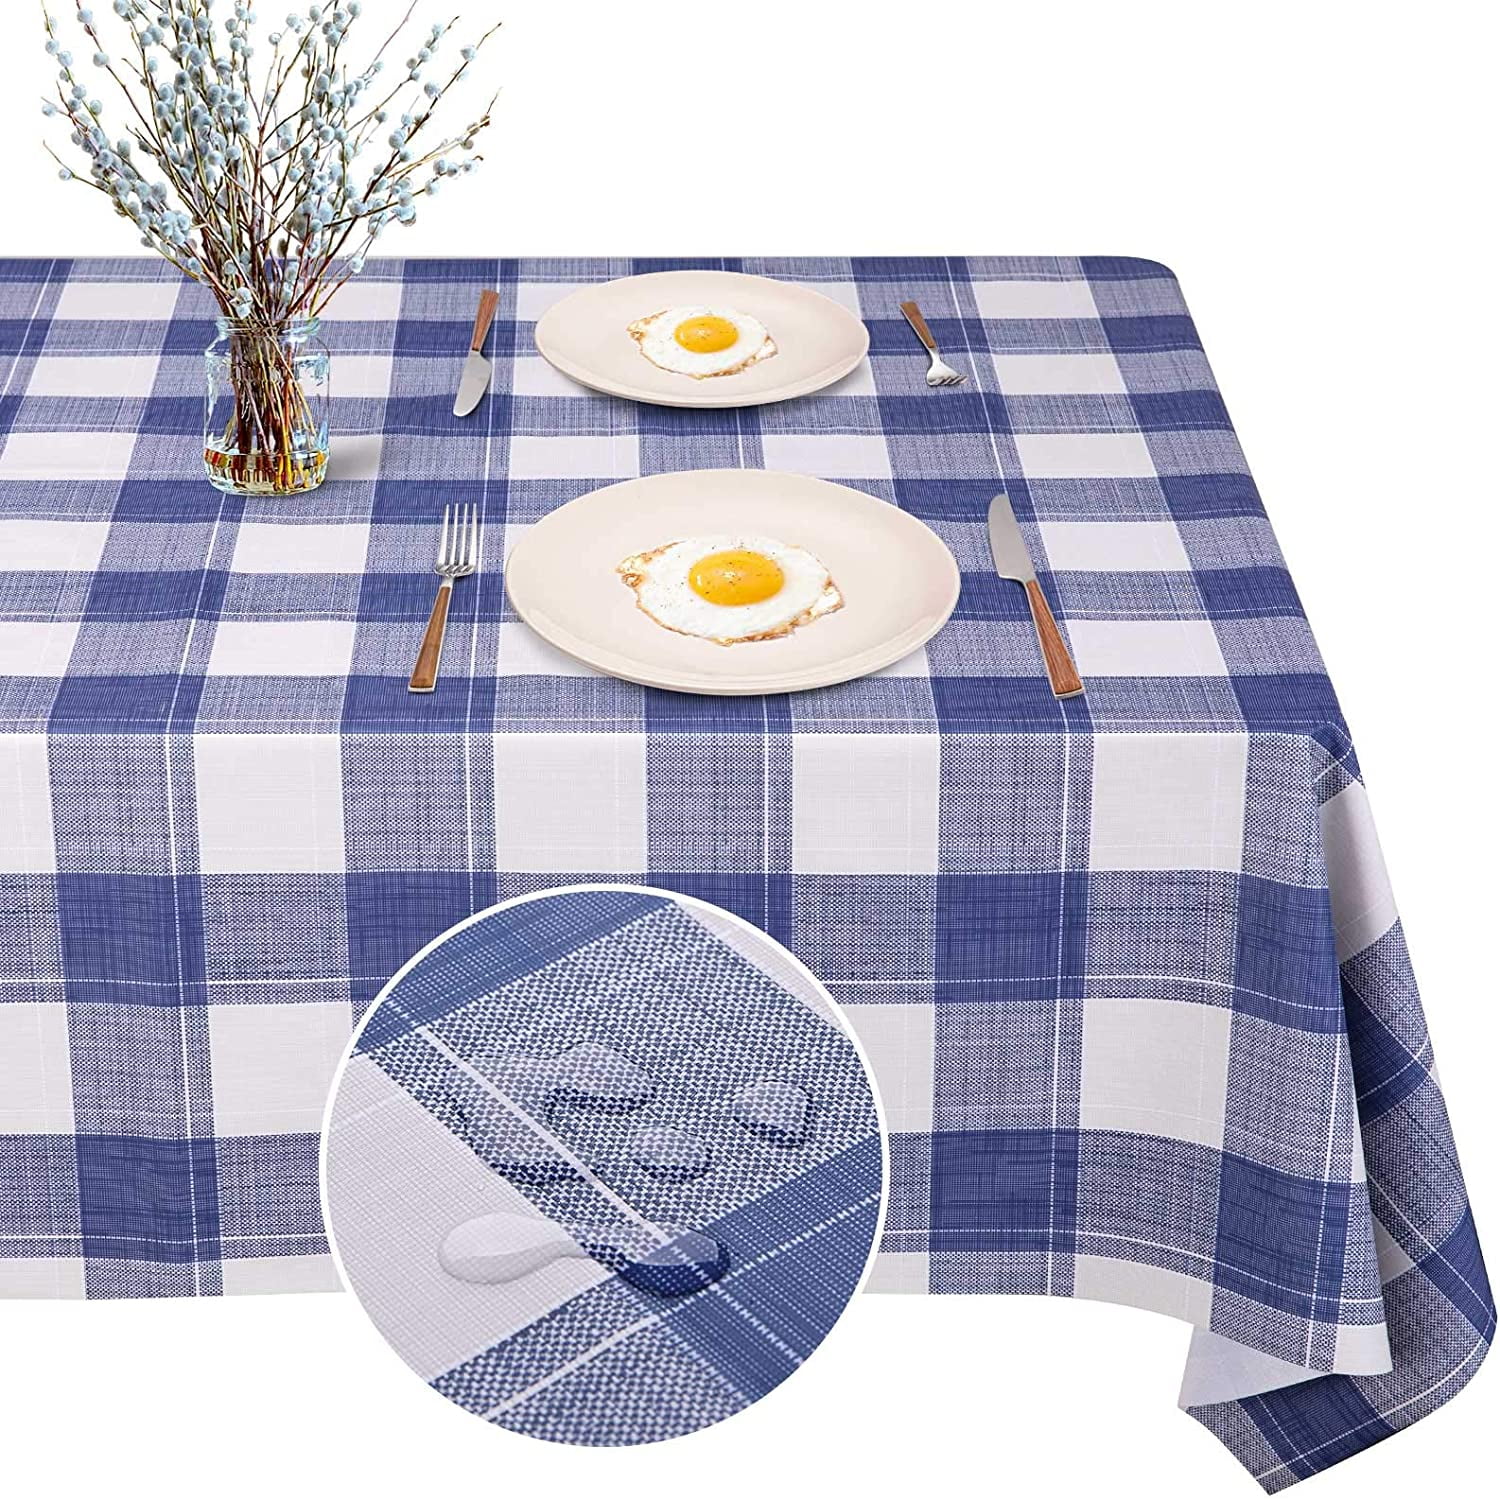 Linen Checkered Squares PVC Tablecloth Vinyl Oilcloth Kitchen Dining Table 